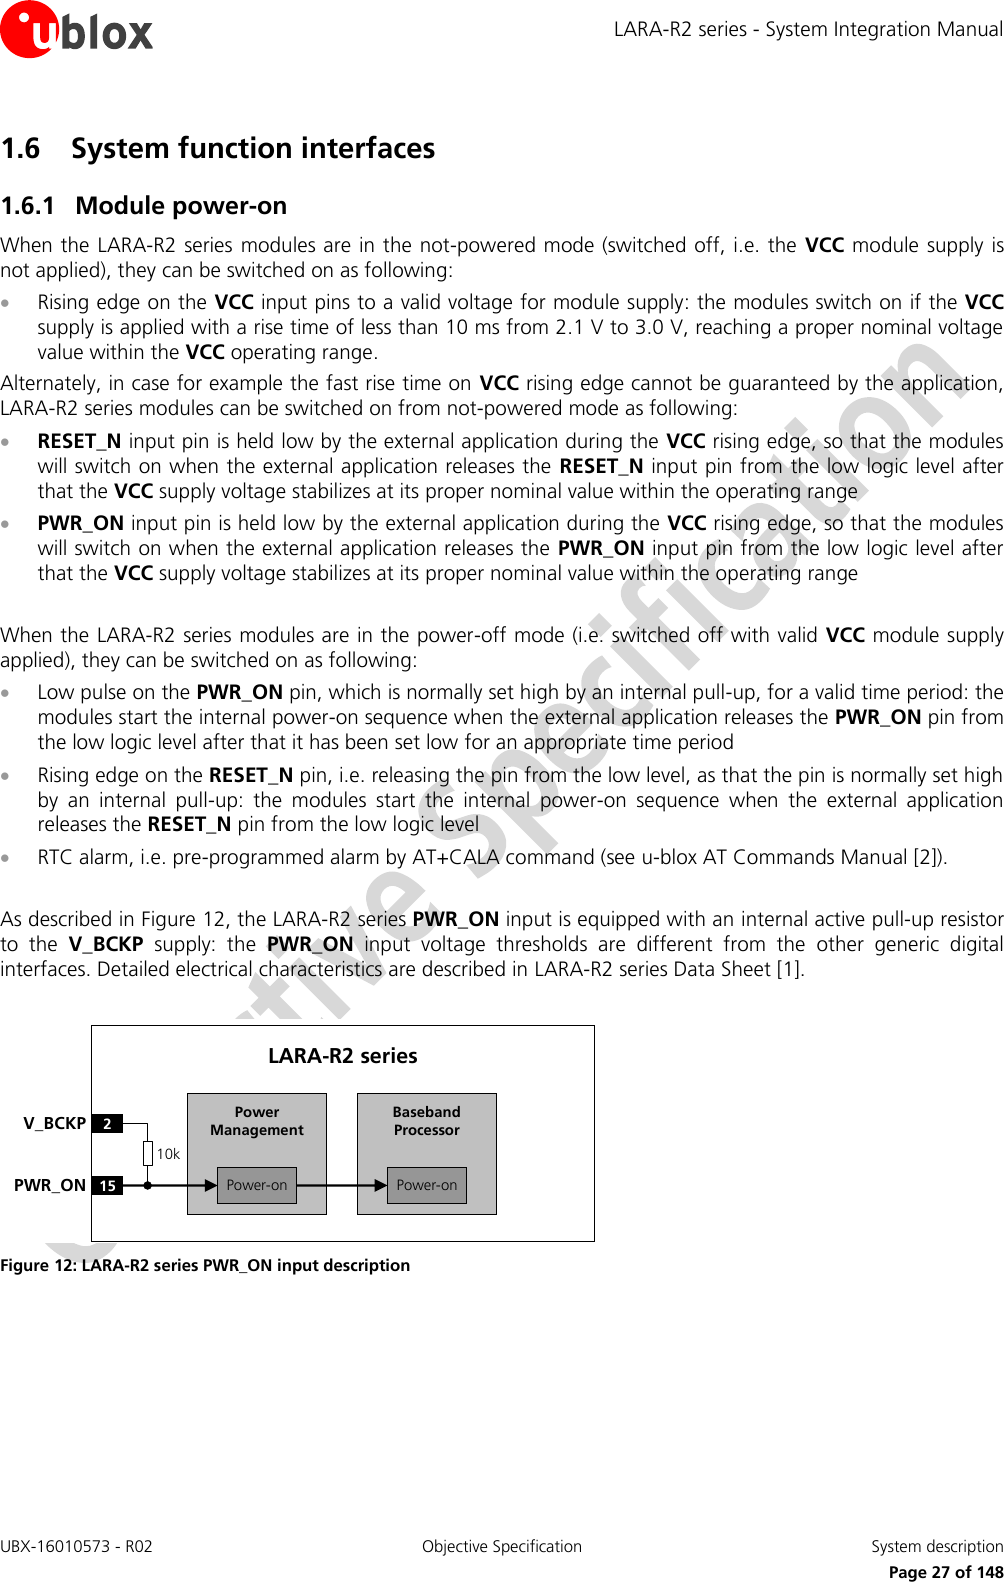 LARA-R2 series - System Integration Manual UBX-16010573 - R02  Objective Specification  System description     Page 27 of 148 1.6 System function interfaces 1.6.1 Module power-on When the LARA-R2 series modules are in the not-powered mode (switched off, i.e. the  VCC module  supply  is not applied), they can be switched on as following:  Rising edge on the VCC input pins to a valid voltage for module supply: the modules switch on if the VCC supply is applied with a rise time of less than 10 ms from 2.1 V to 3.0 V, reaching a proper nominal voltage value within the VCC operating range. Alternately, in case for example the fast rise time on VCC rising edge cannot be guaranteed by the application, LARA-R2 series modules can be switched on from not-powered mode as following:  RESET_N input pin is held low by the external application during the VCC rising edge, so that the modules will switch on when the external application releases the  RESET_N input pin from the low logic level after that the VCC supply voltage stabilizes at its proper nominal value within the operating range  PWR_ON input pin is held low by the external application during the VCC rising edge, so that the modules will switch on when the external application releases the  PWR_ON input pin from the low logic level after that the VCC supply voltage stabilizes at its proper nominal value within the operating range  When the LARA-R2 series modules are in the power-off mode (i.e. switched off with valid VCC module supply applied), they can be switched on as following:  Low pulse on the PWR_ON pin, which is normally set high by an internal pull-up, for a valid time period: the modules start the internal power-on sequence when the external application releases the PWR_ON pin from the low logic level after that it has been set low for an appropriate time period  Rising edge on the RESET_N pin, i.e. releasing the pin from the low level, as that the pin is normally set high by  an  internal  pull-up:  the  modules  start  the  internal  power-on  sequence  when  the  external  application releases the RESET_N pin from the low logic level  RTC alarm, i.e. pre-programmed alarm by AT+CALA command (see u-blox AT Commands Manual [2]).  As described in Figure 12, the LARA-R2 series PWR_ON input is equipped with an internal active pull-up resistor to  the  V_BCKP  supply:  the  PWR_ON  input  voltage  thresholds  are  different  from  the  other  generic  digital interfaces. Detailed electrical characteristics are described in LARA-R2 series Data Sheet [1].  Baseband Processor15PWR_ONLARA-R2 series2V_BCKPPower-onPower ManagementPower-on10k Figure 12: LARA-R2 series PWR_ON input description   